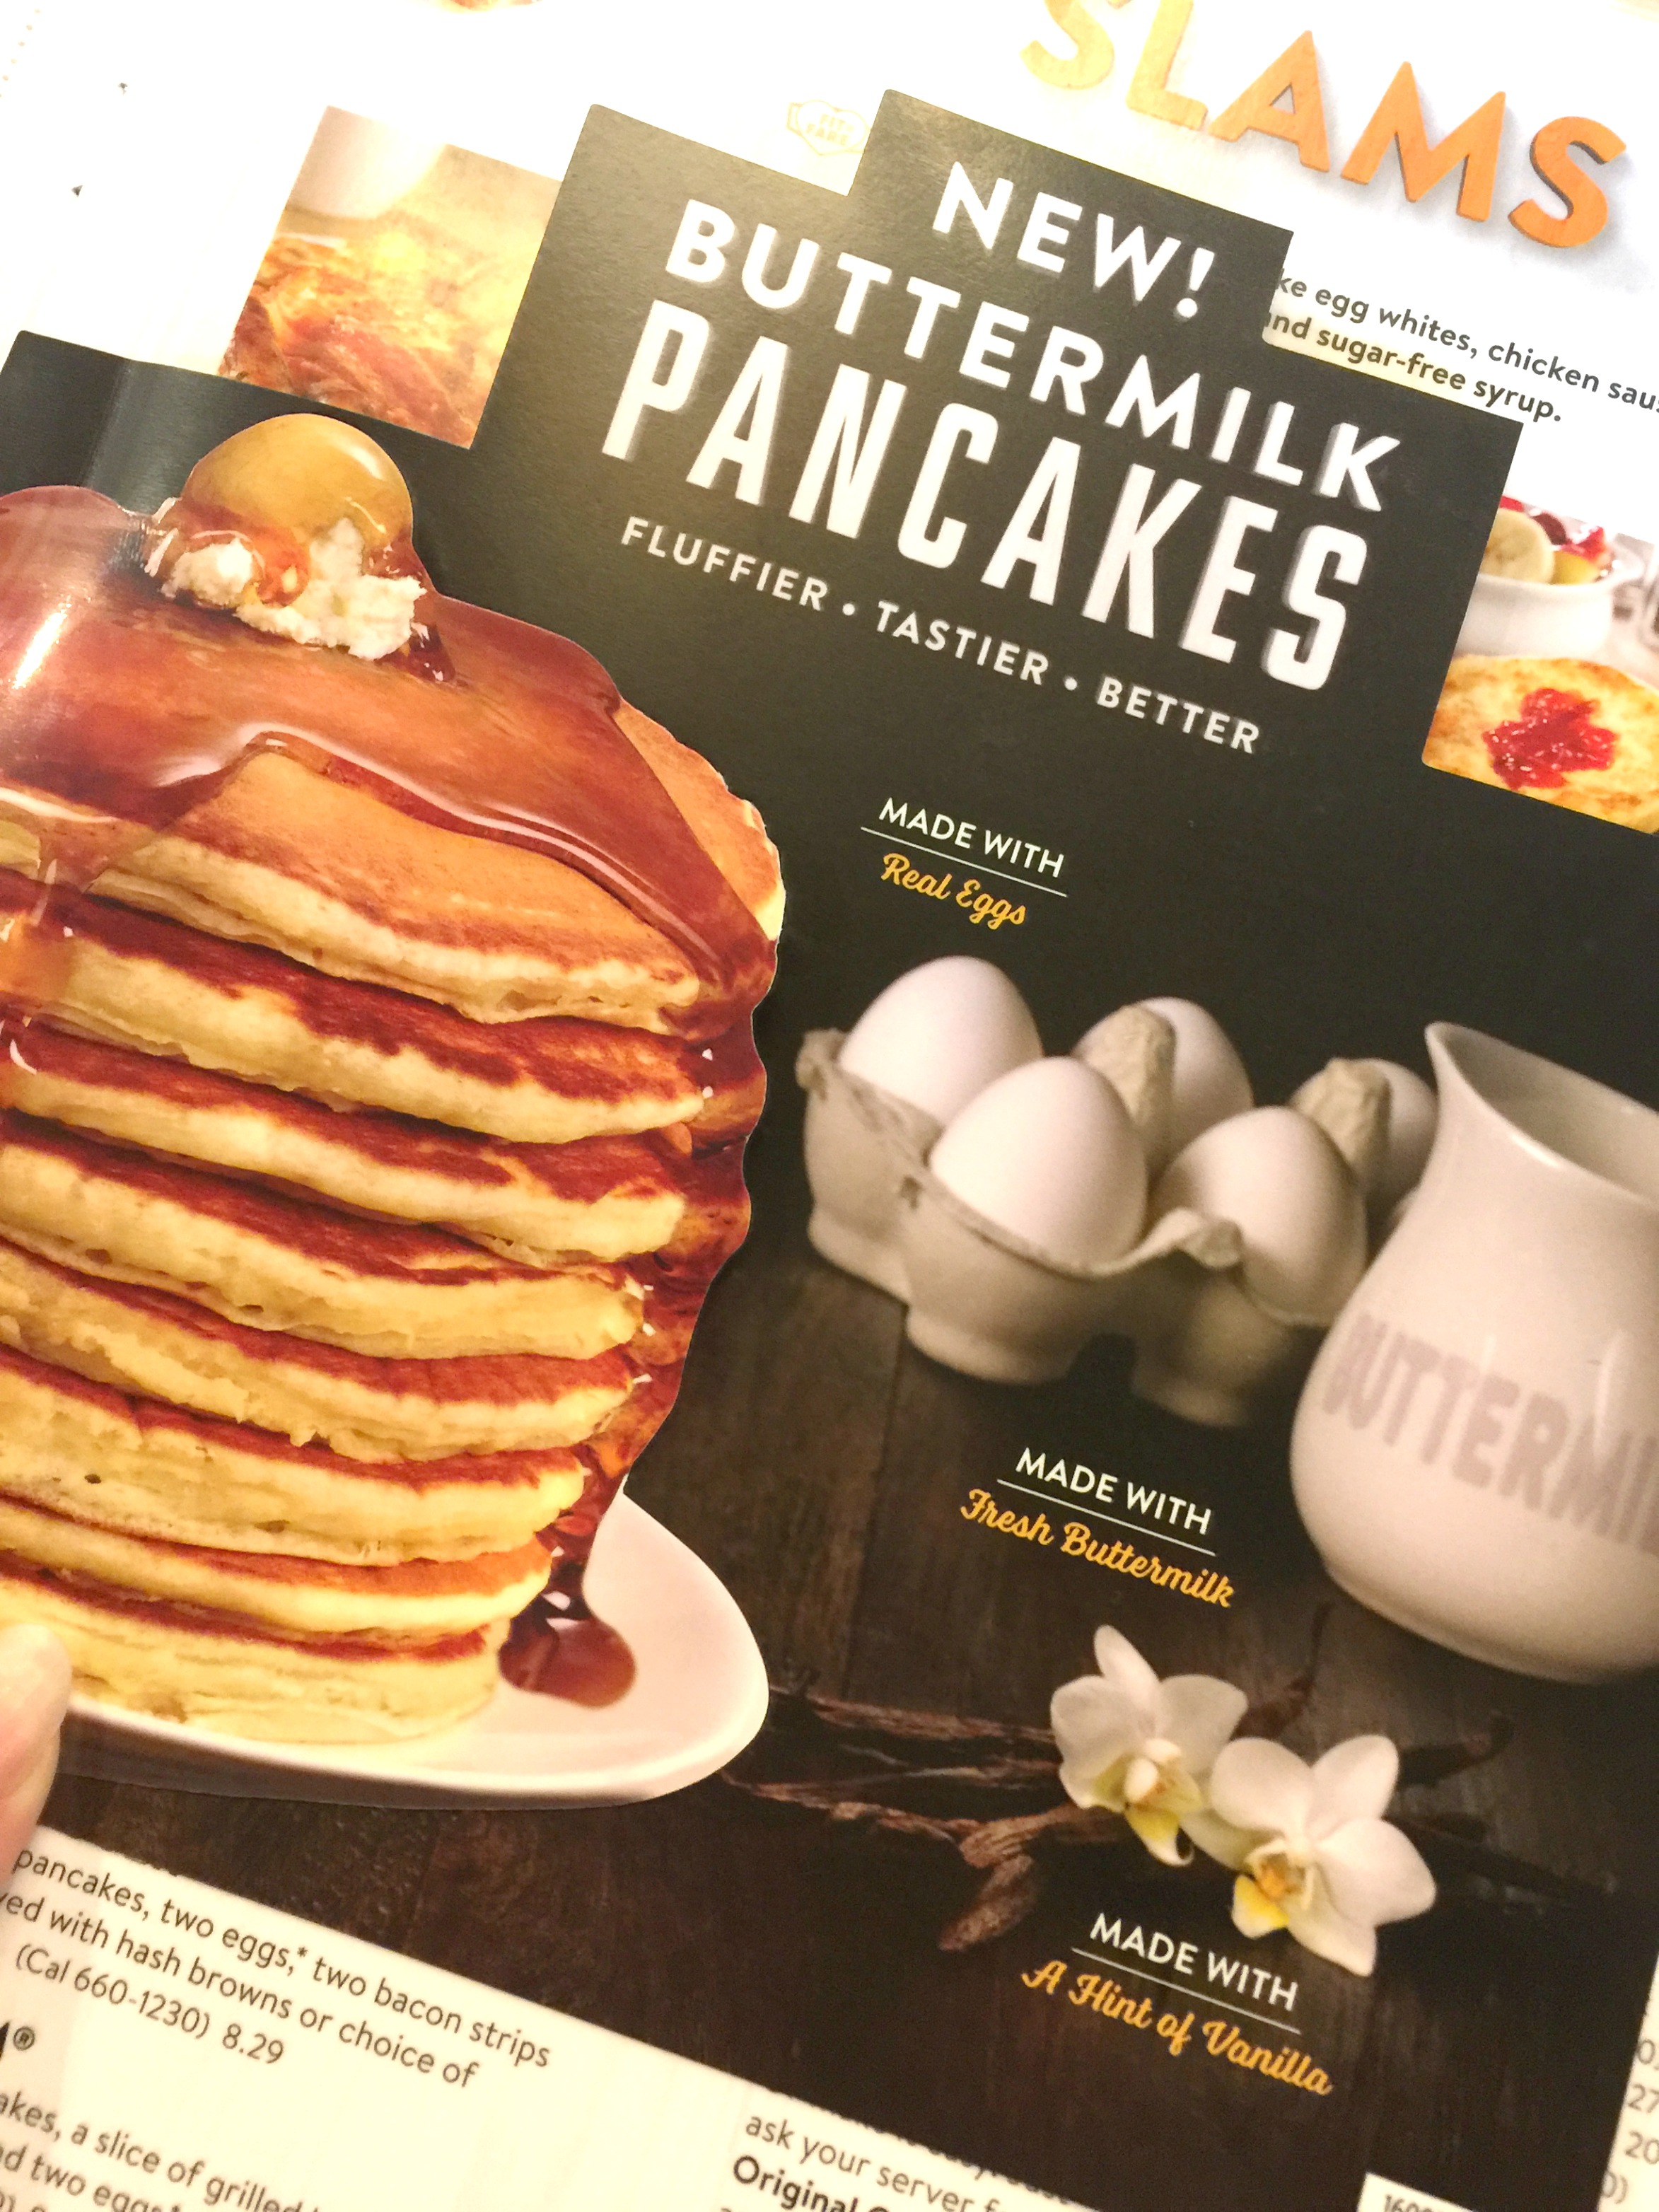 During the month of September, families can enjoy free pancakes for kids at Denny's with the purchase of adult meals!